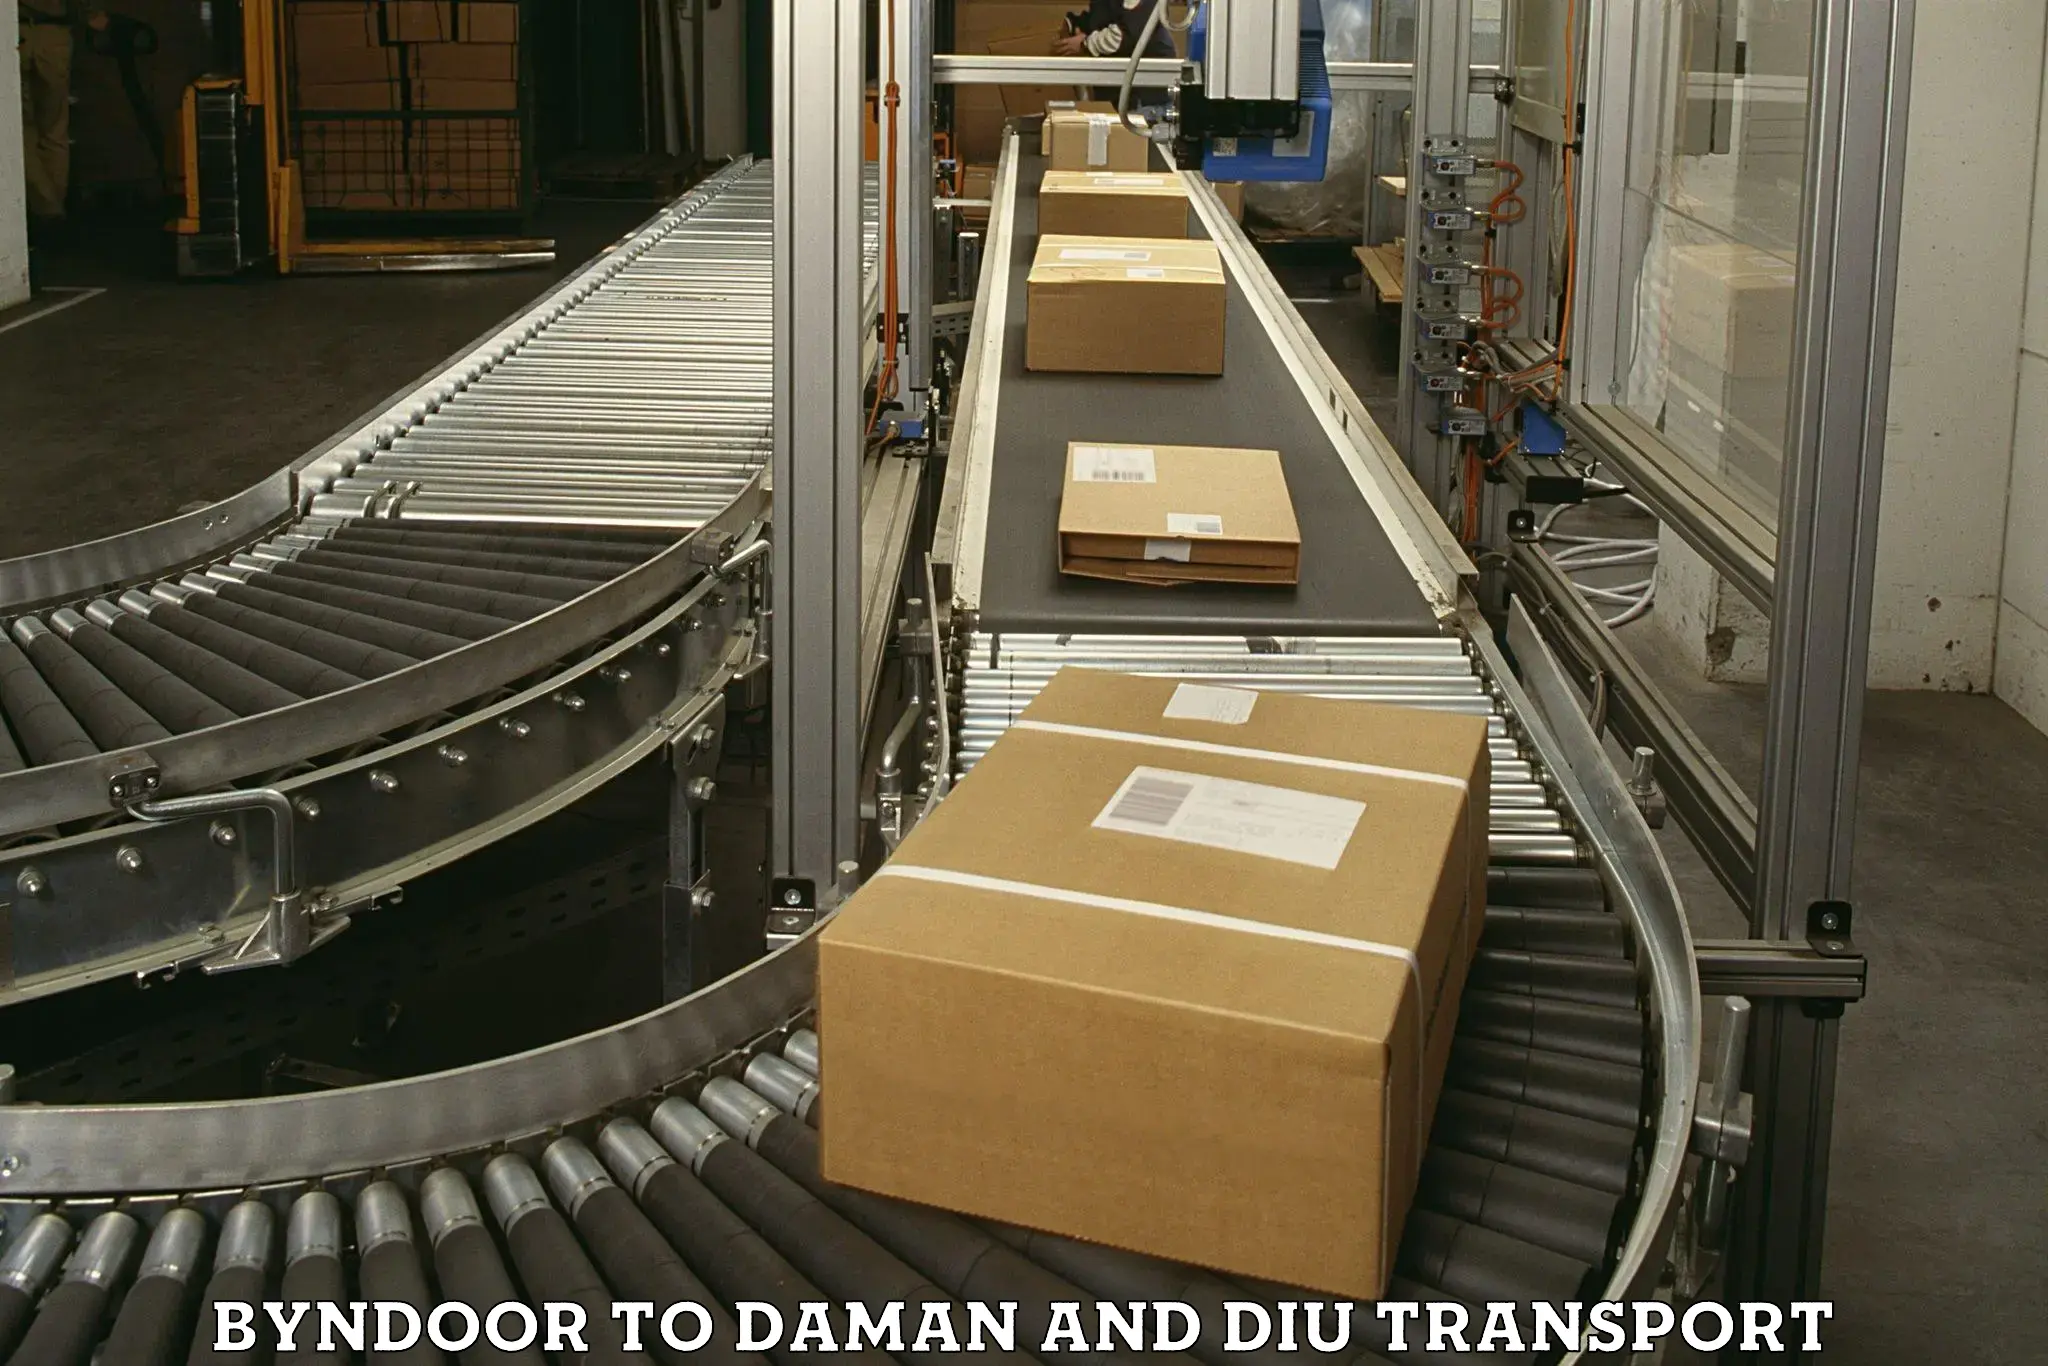 Container transport service Byndoor to Daman and Diu